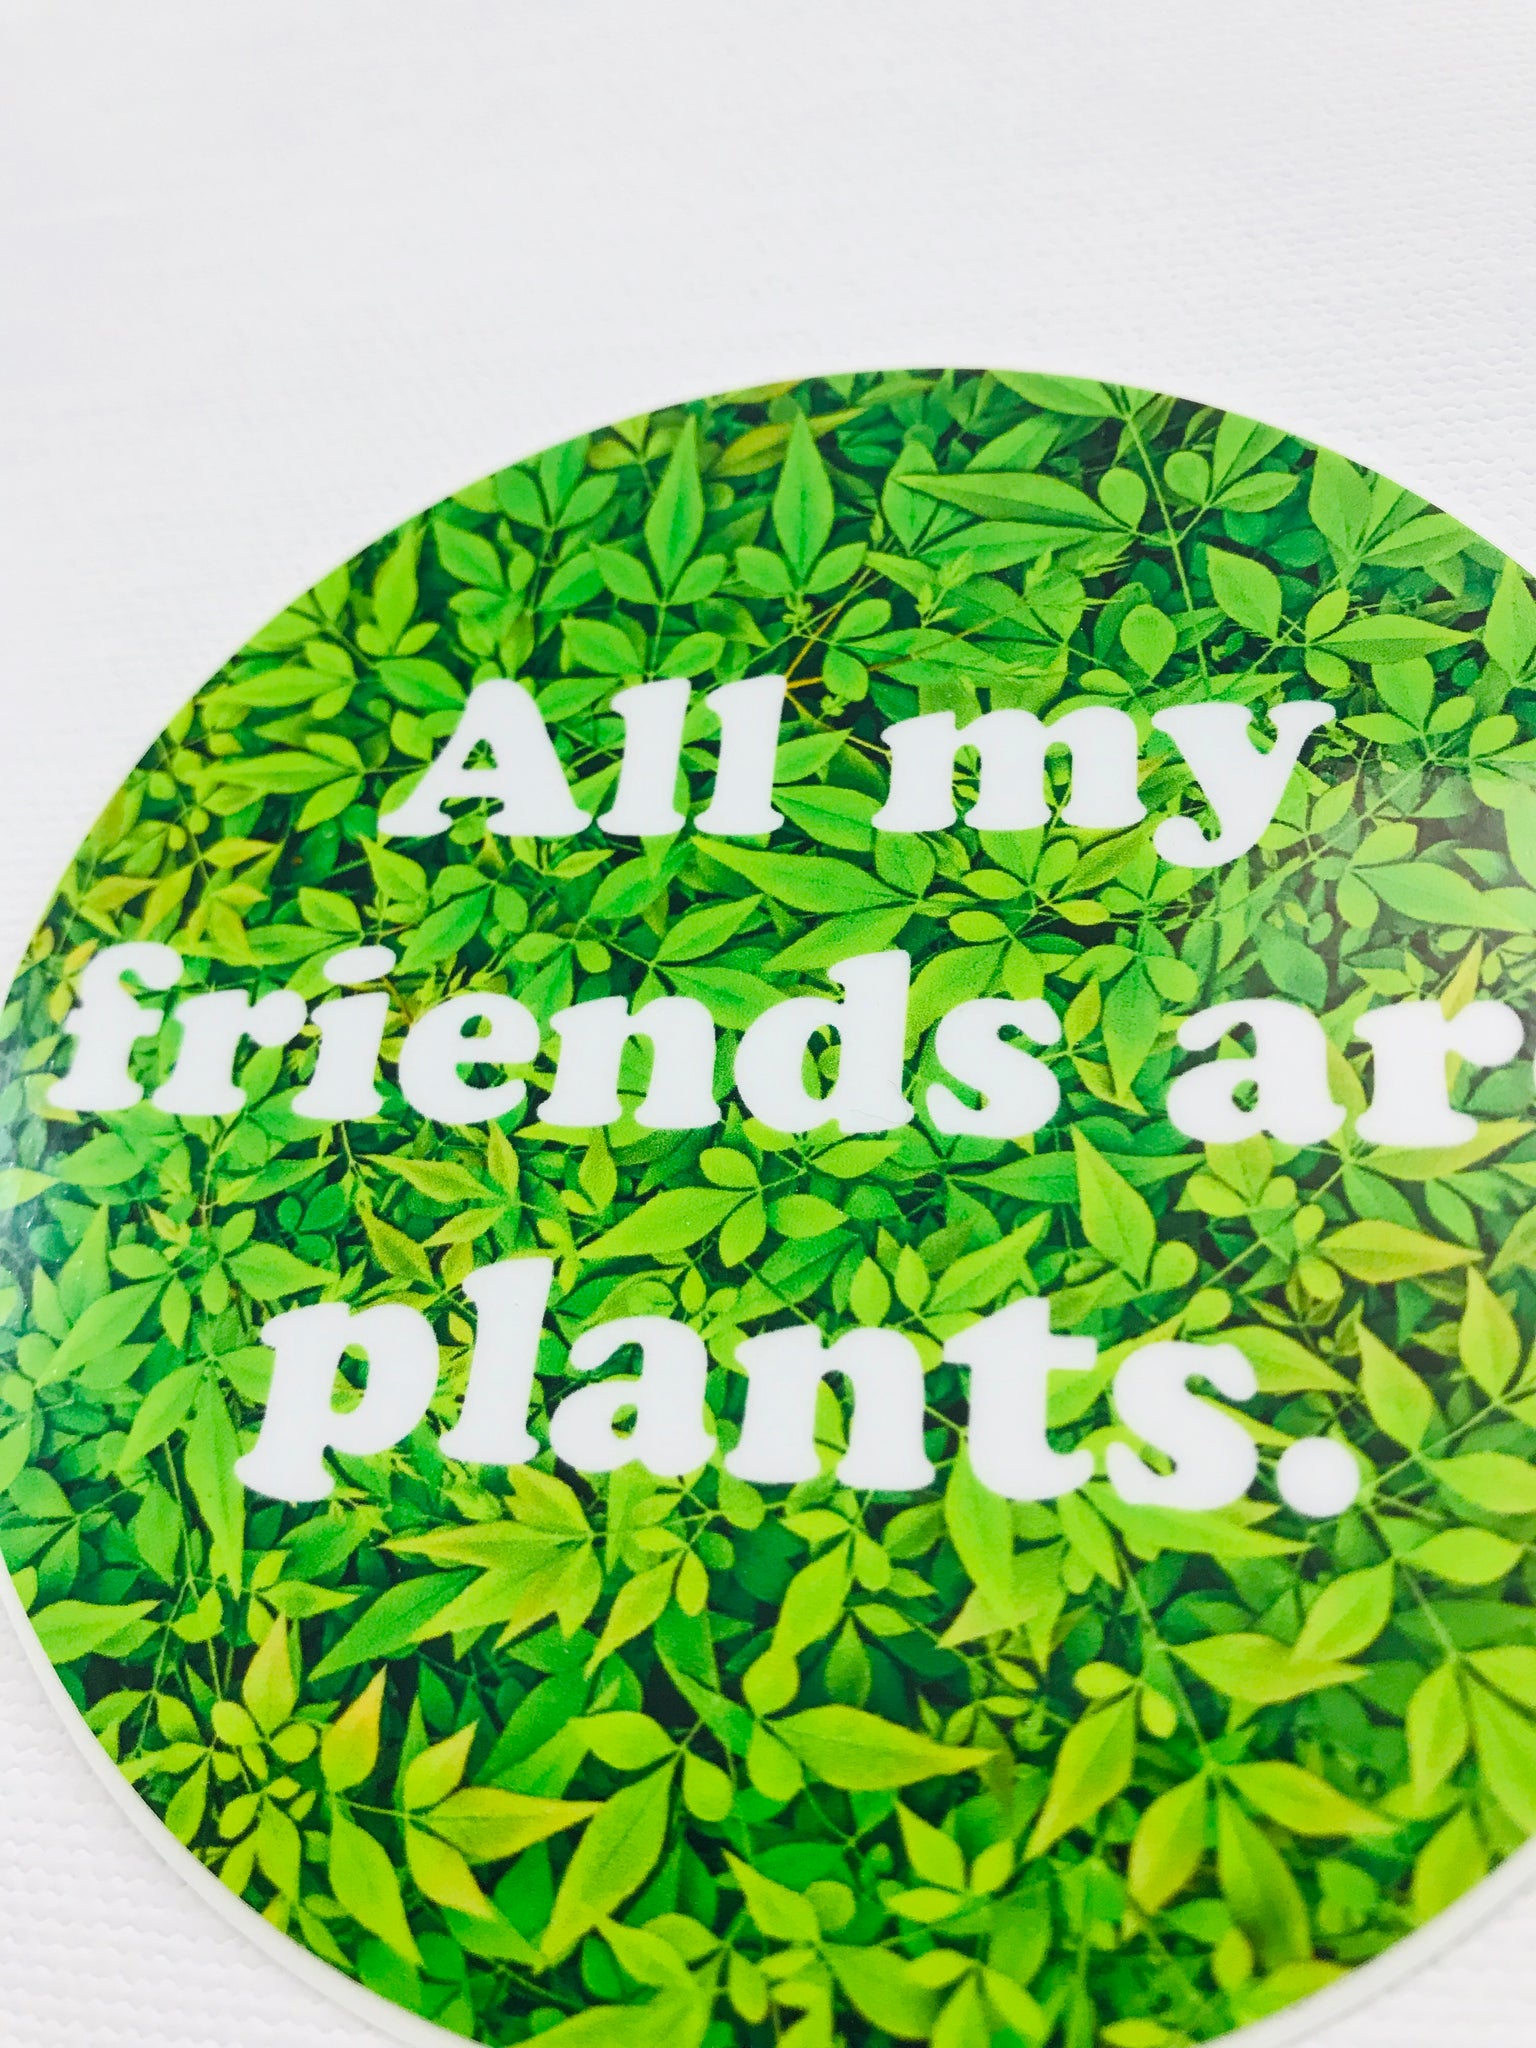 All My Friends Are Plants. Green Leaves Sticker